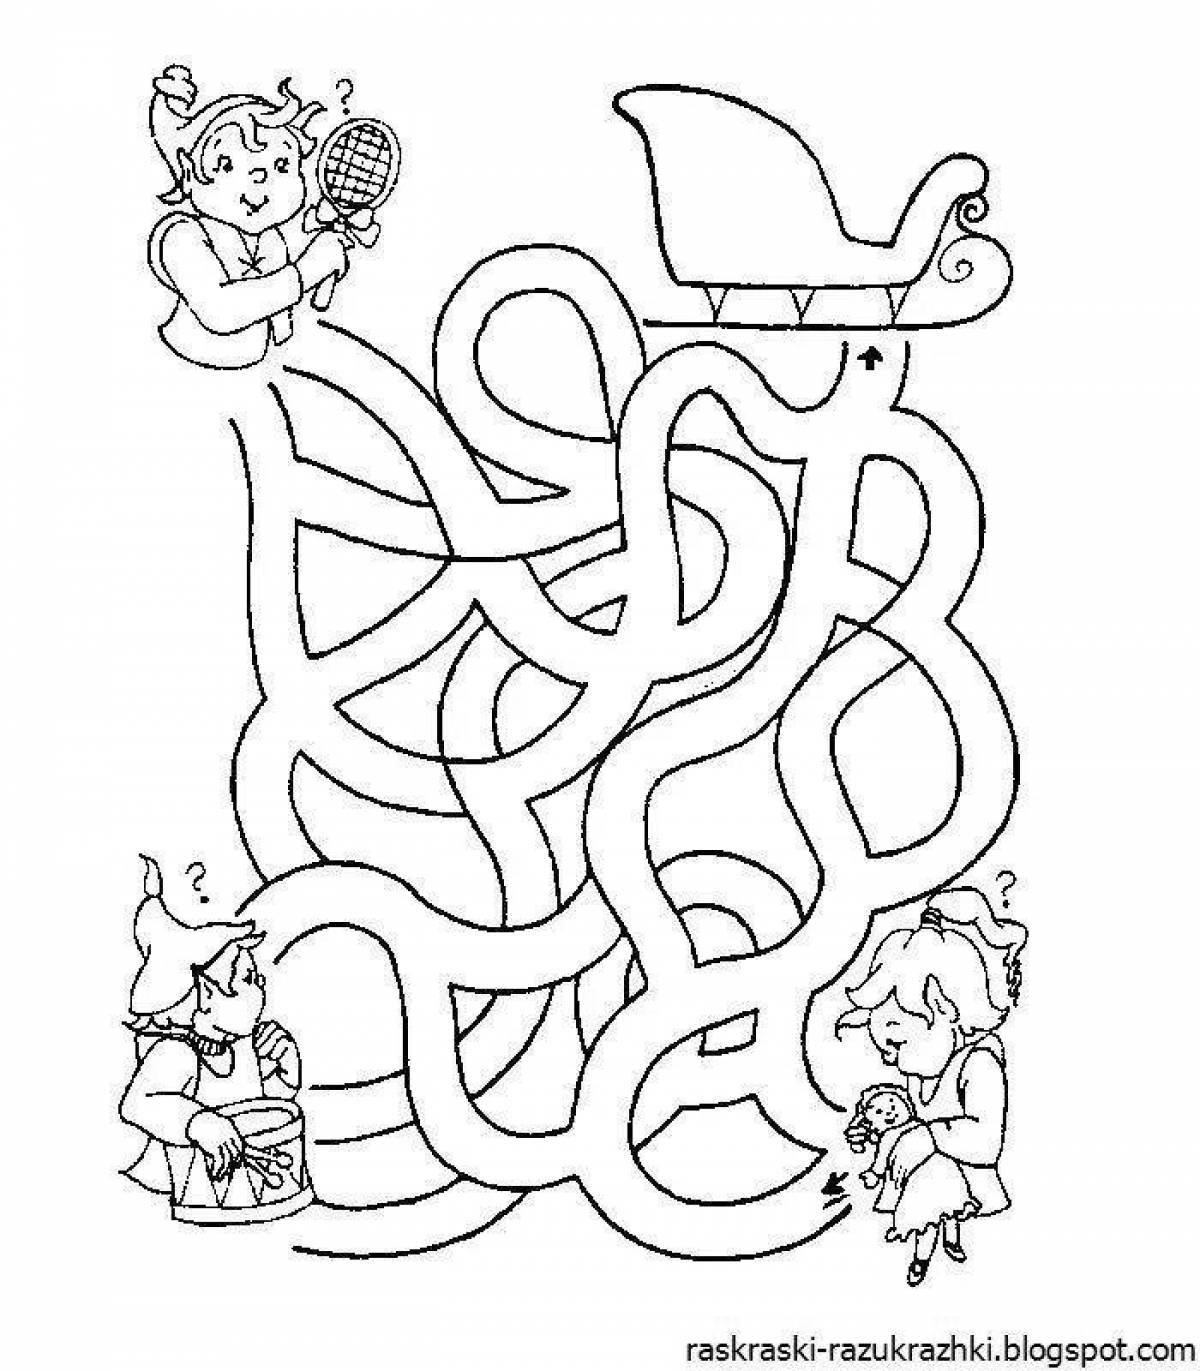 Fun coloring maze for children 5-6 years old